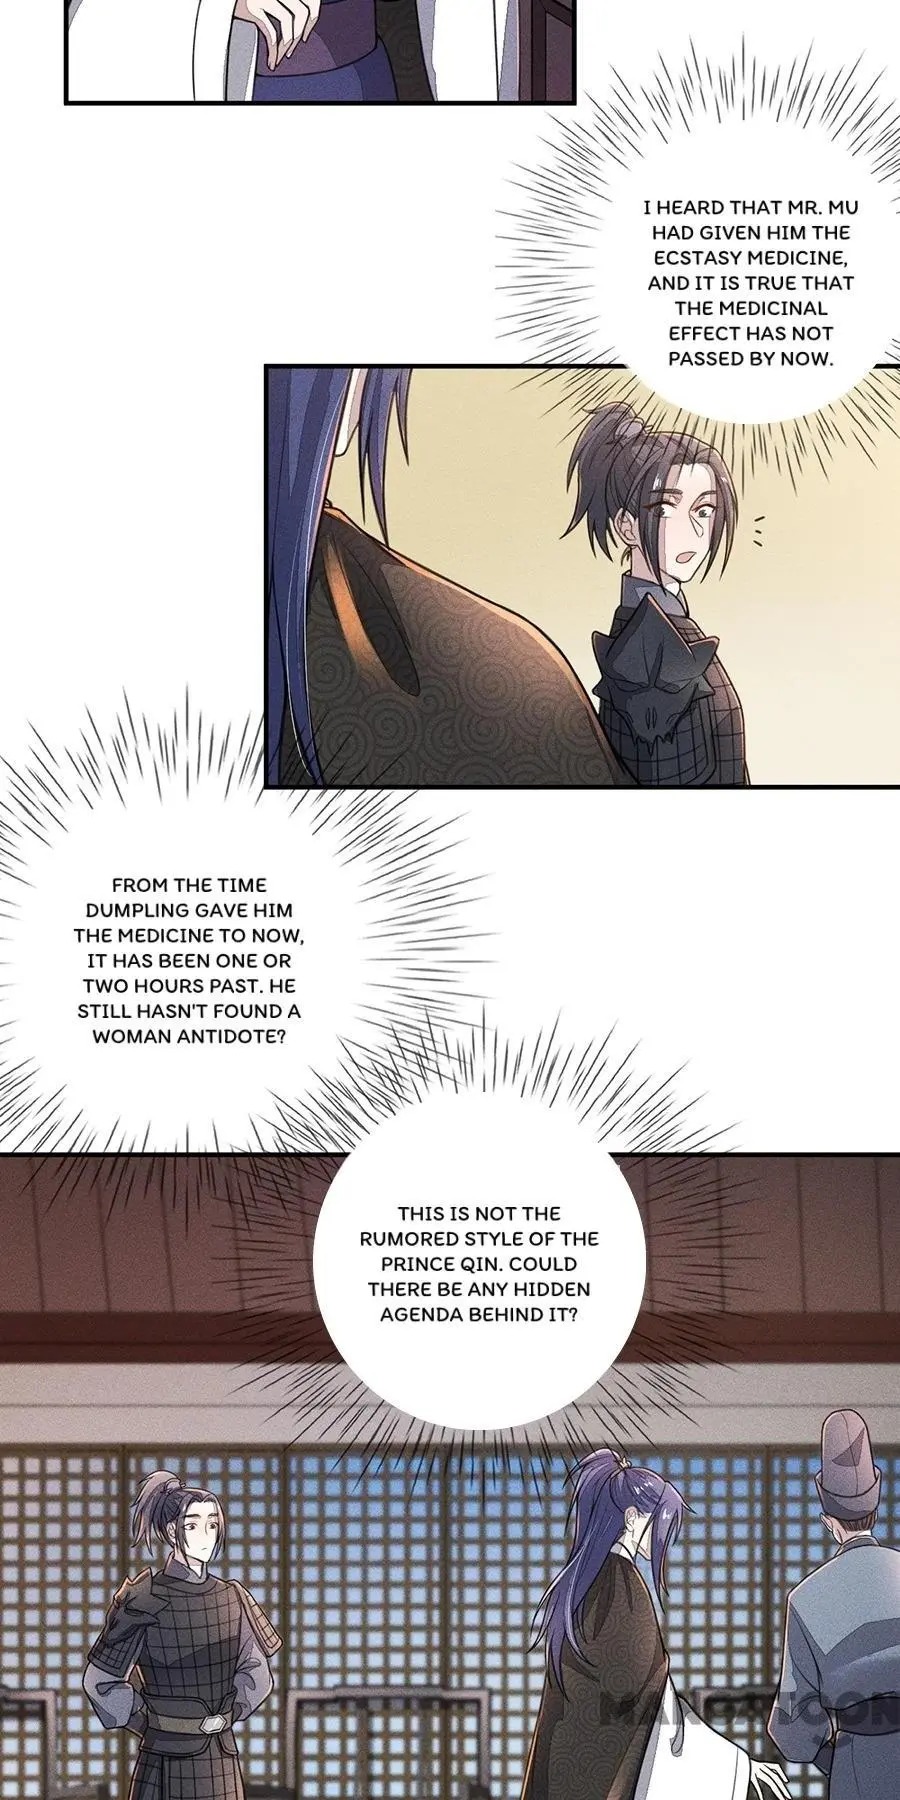 An One On One, Your Highness - Page 2